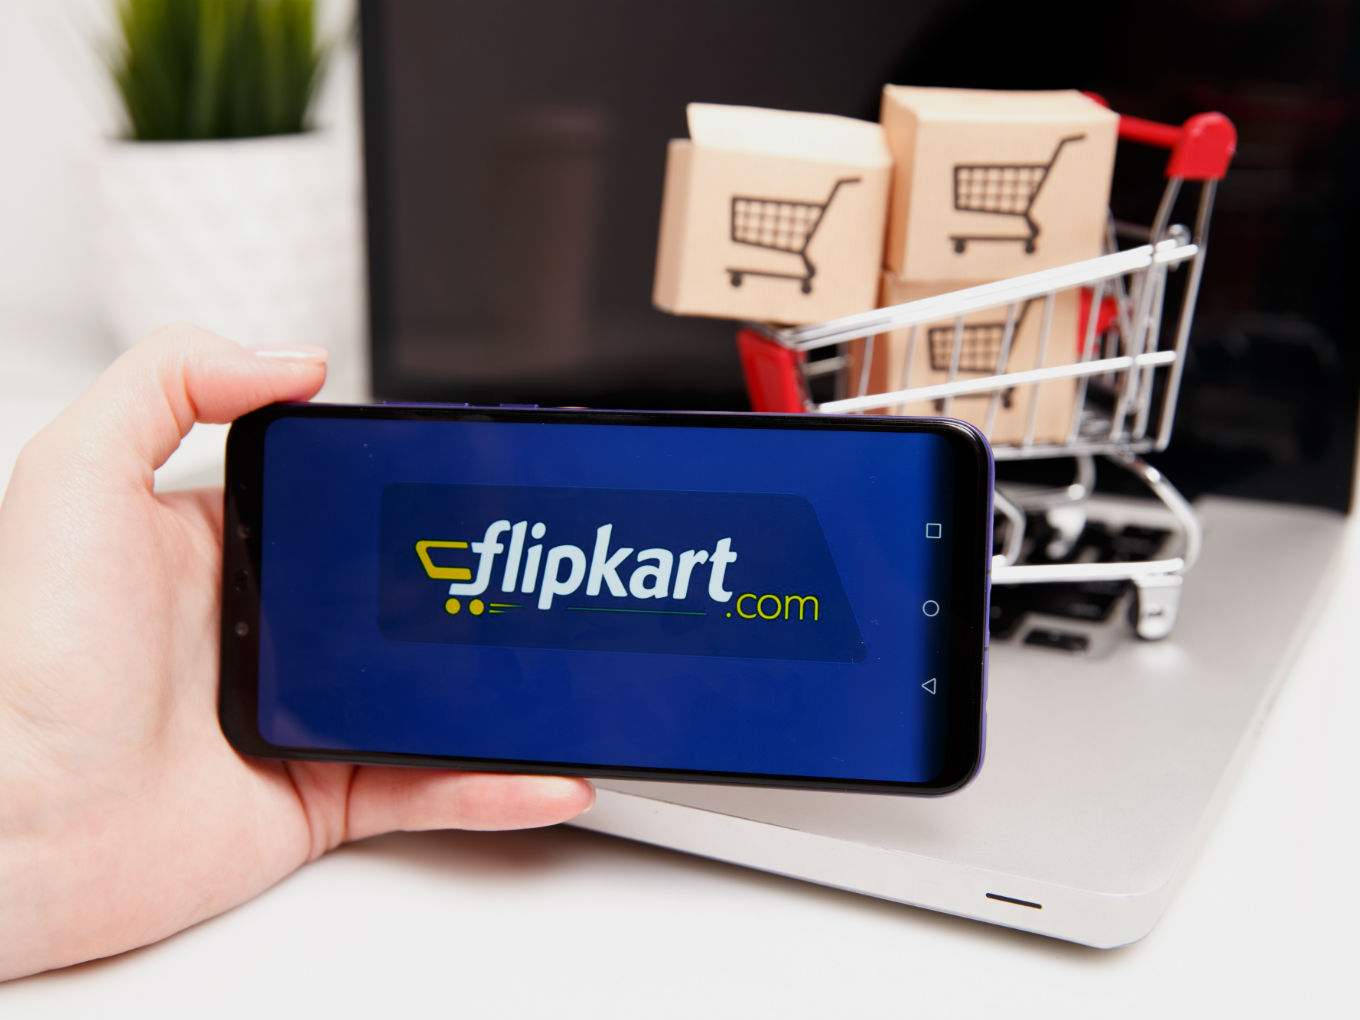 Flipkart Counts On Make-In-India Tag As USP For Its Private Label Brands